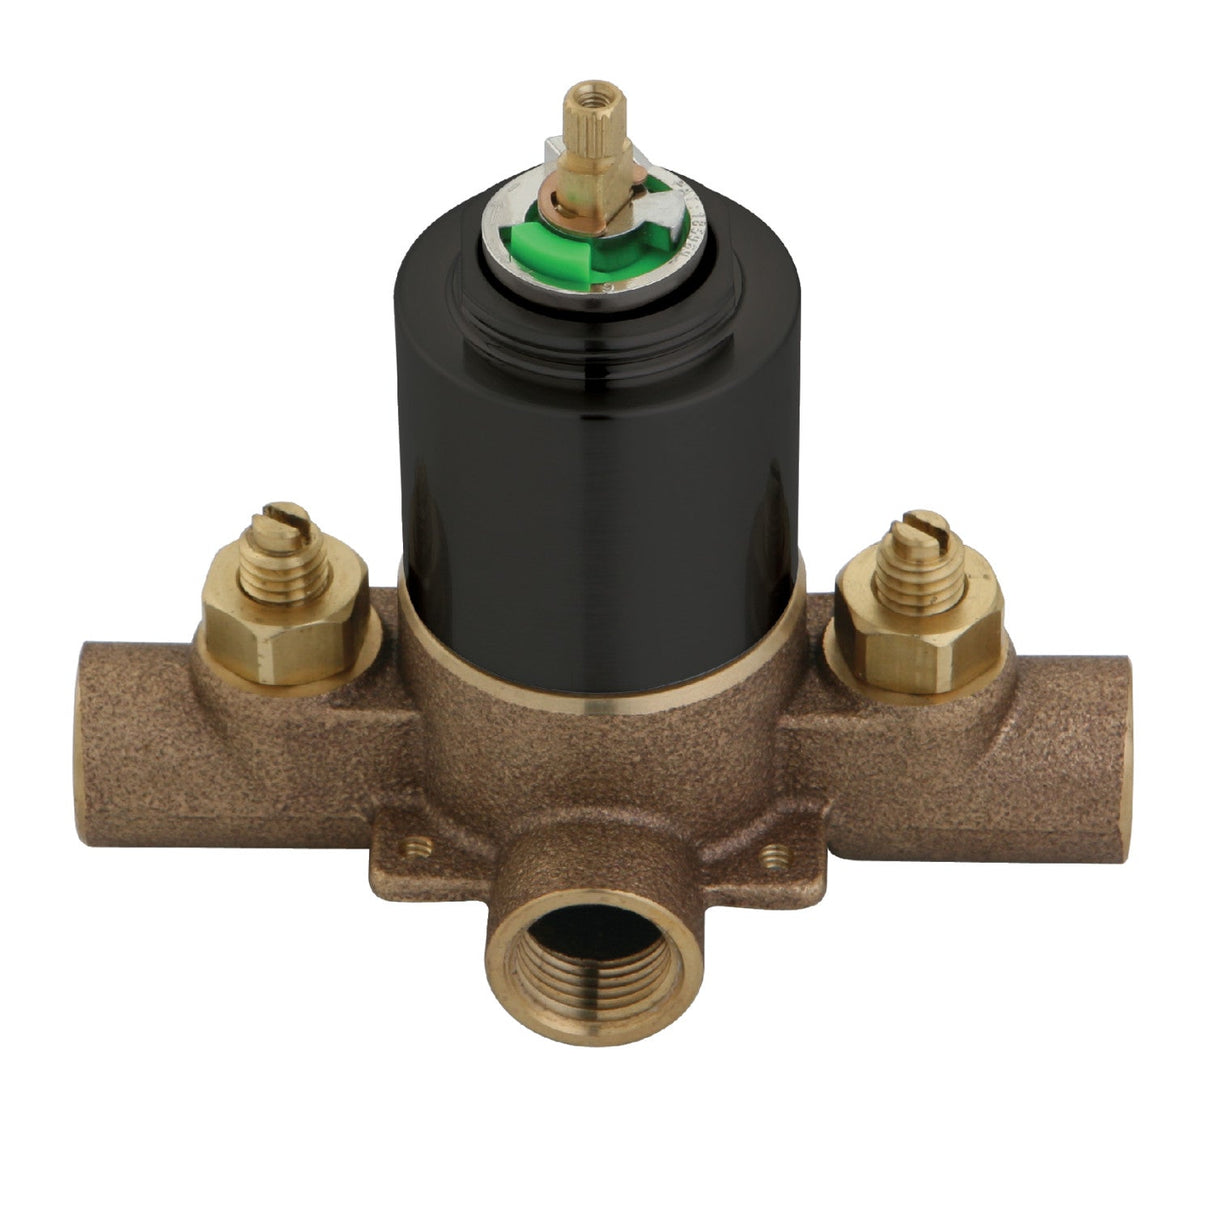 Chatham KB655V Pressure Balanced Tub and Shower Valve, with Stops, Oil Rubbed Bronze